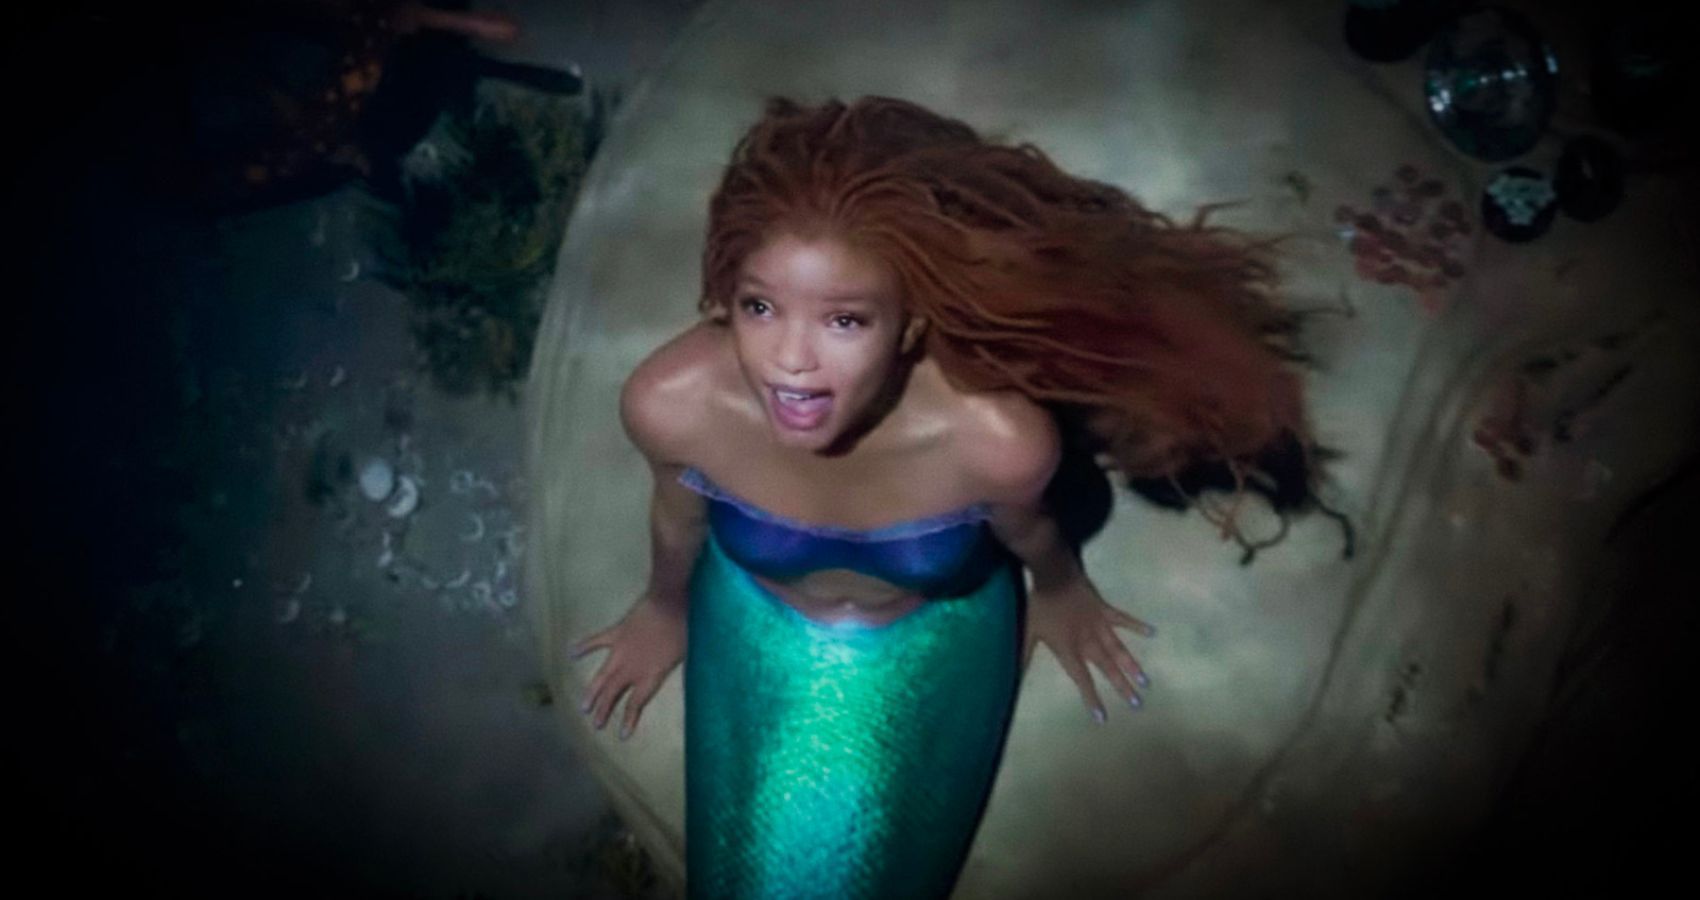 Could The Little Mermaid Save The Reputation Of Disney's Live Action